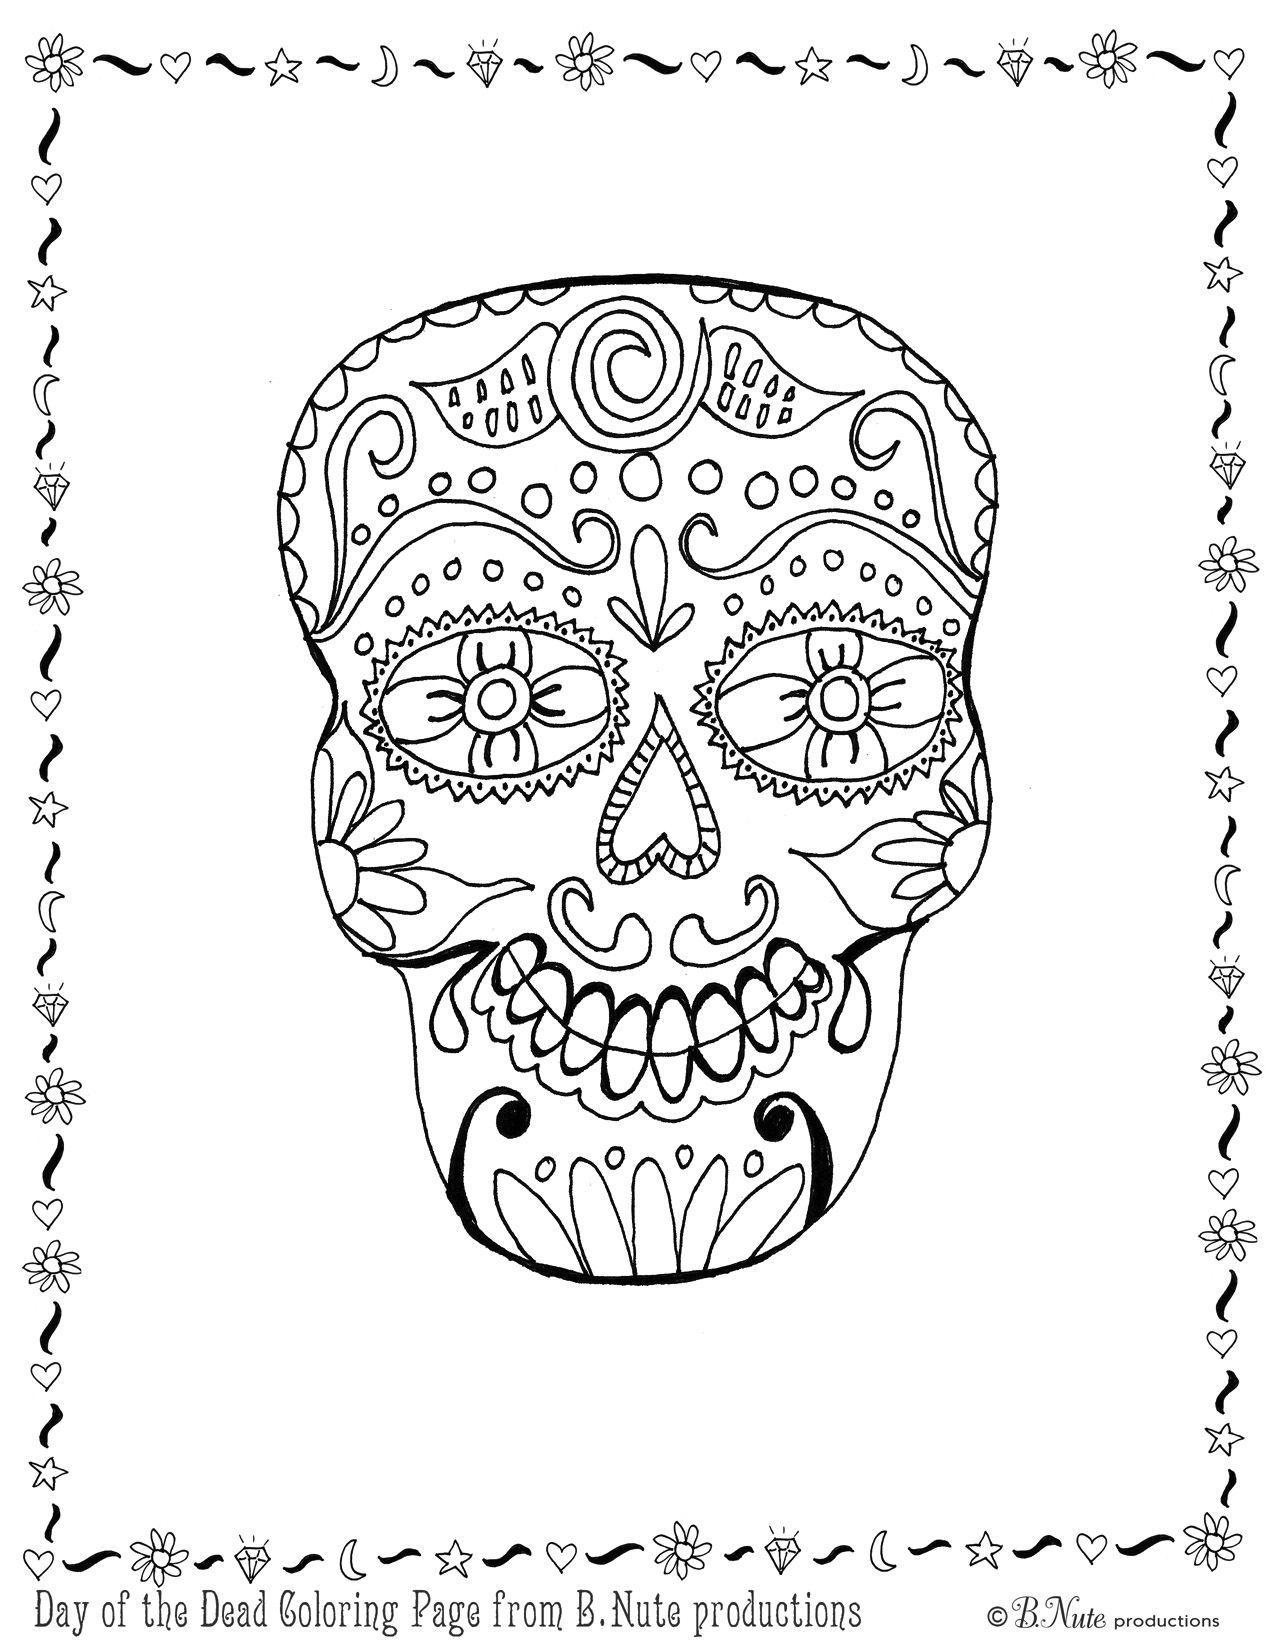 bnute productions Free Printable Day of the Dead Skull Coloring Page